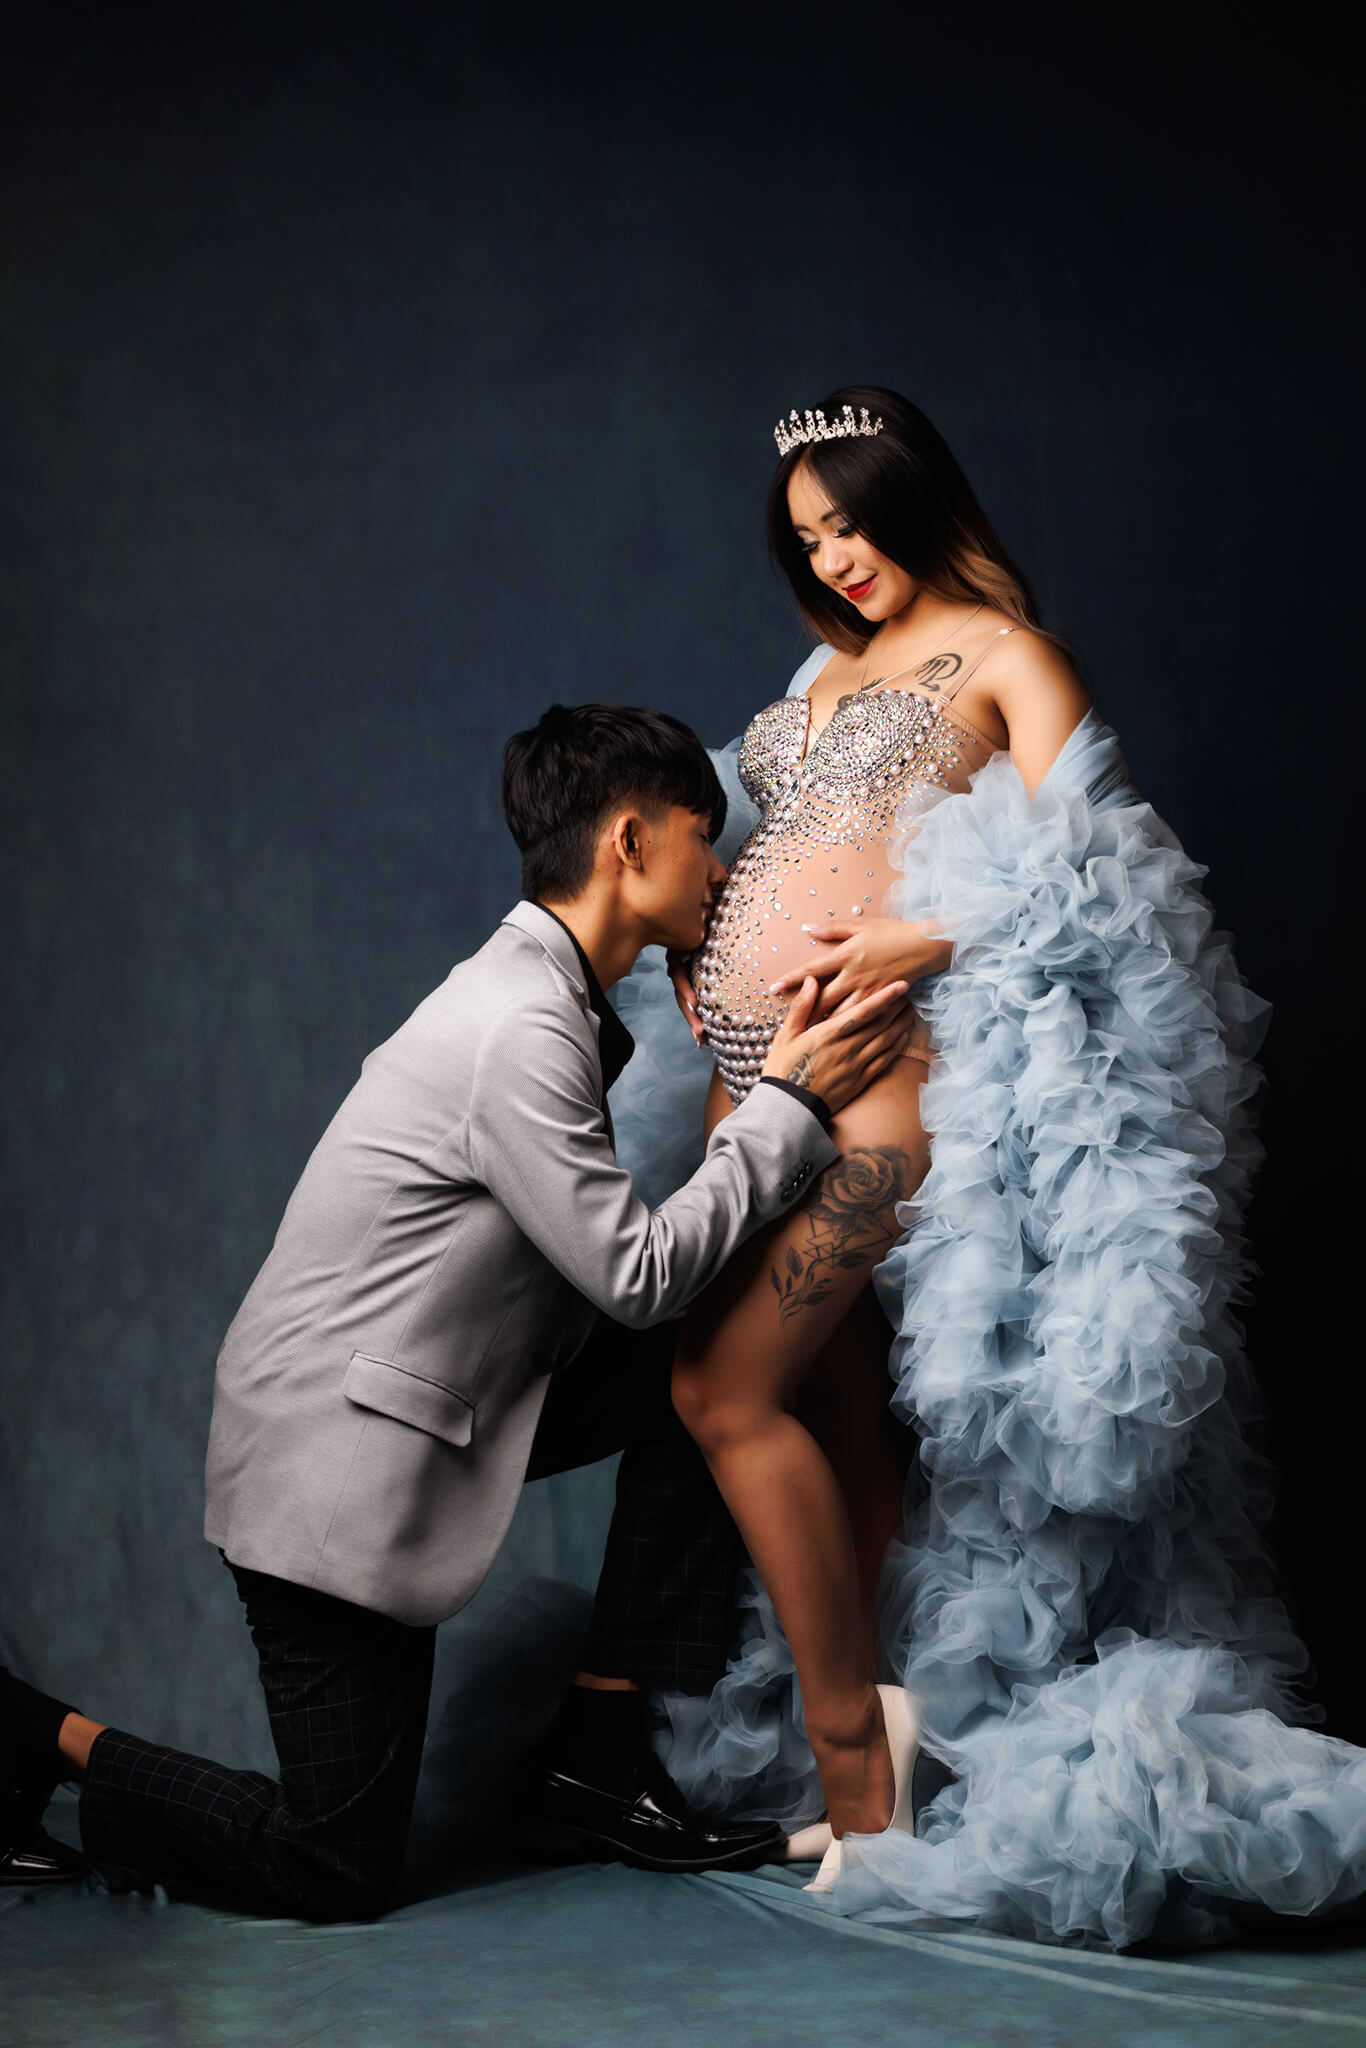 A mother-to-be in an ornate luxury maternity gown and crown stands in a studio while the father-to-be kneels and kisses her belly Oona Cares